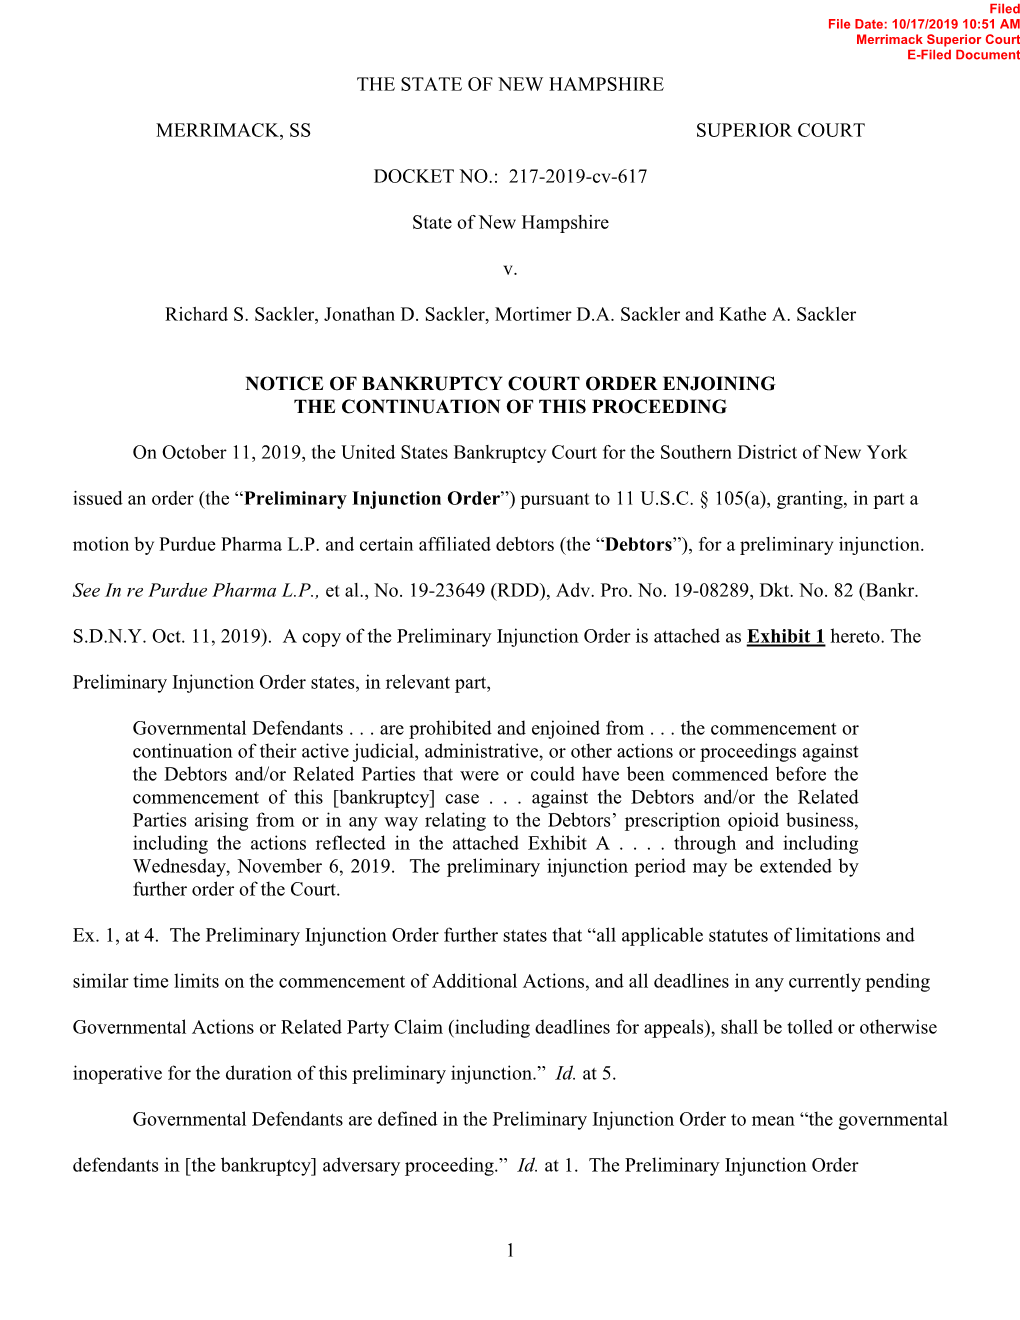 Notice of Bankruptcy Court Order Enjoining the Continuation of This Proceeding